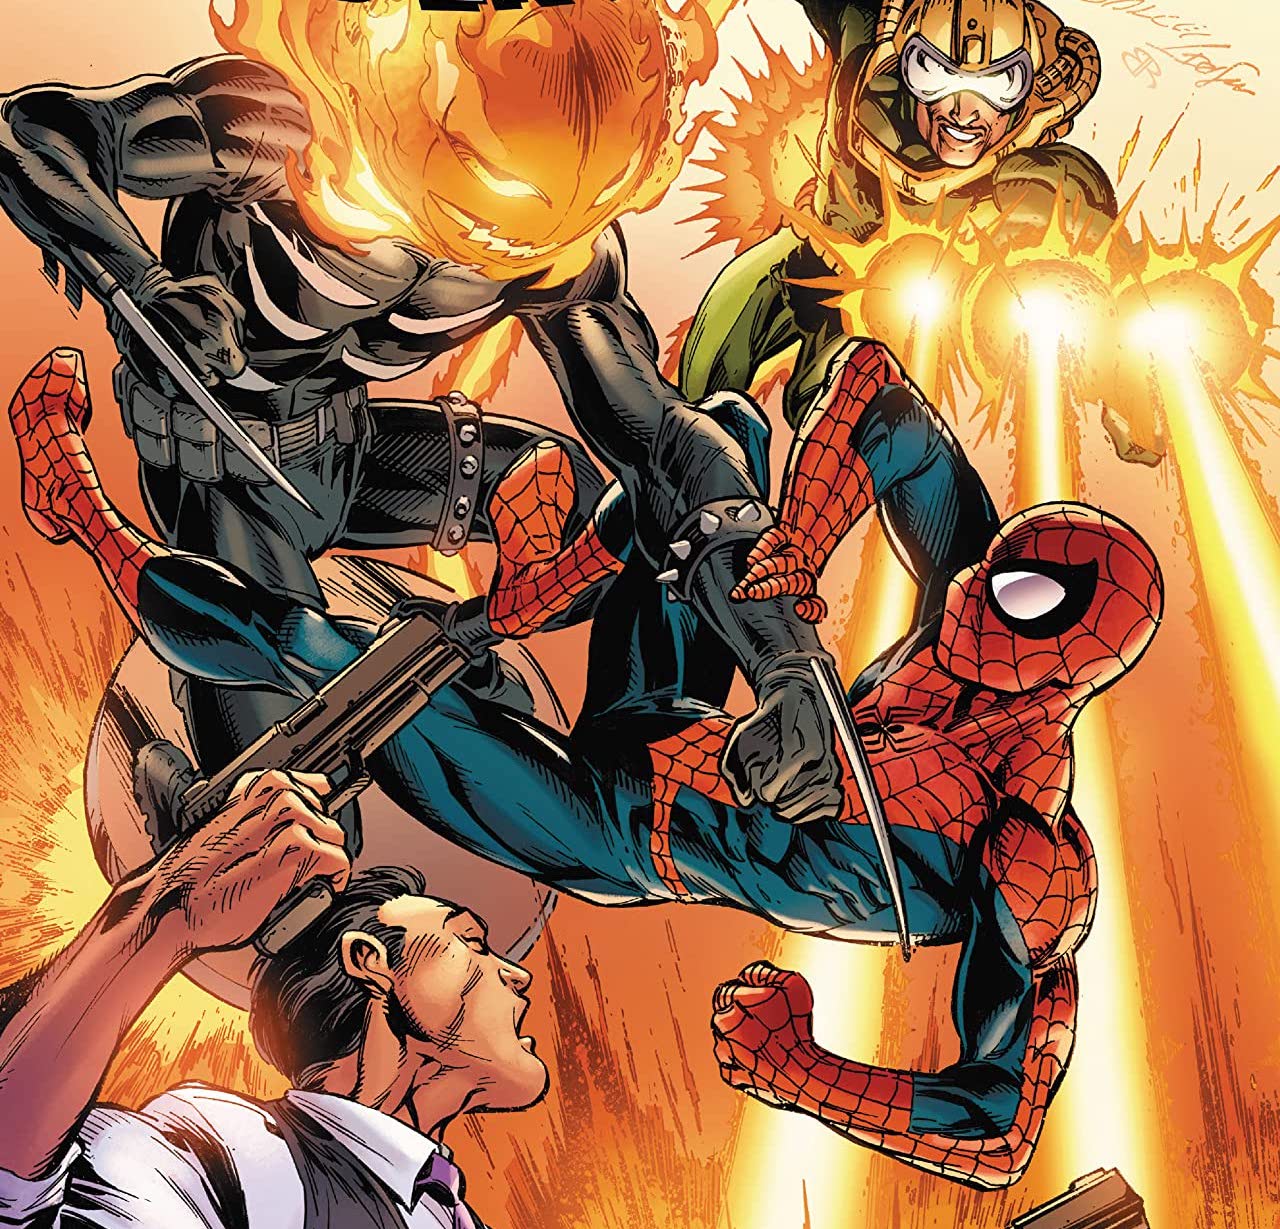 'Amazing Spider-Man' #69 continues to wrap up plots